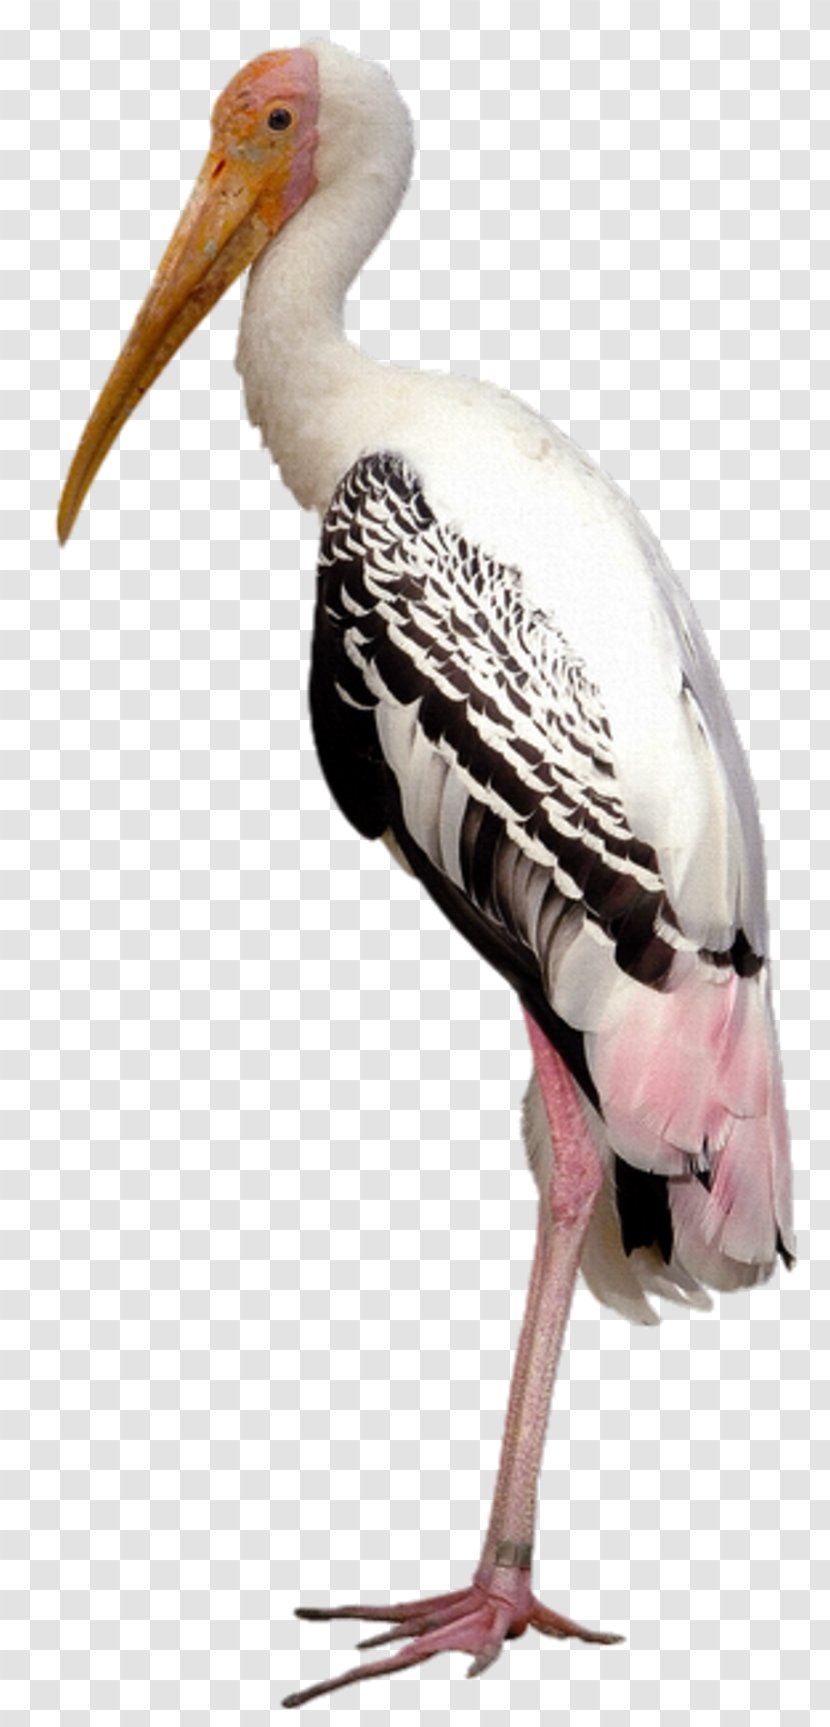 Marabou Stork Painted Image Stock Photography Royalty-free - Painting Transparent PNG